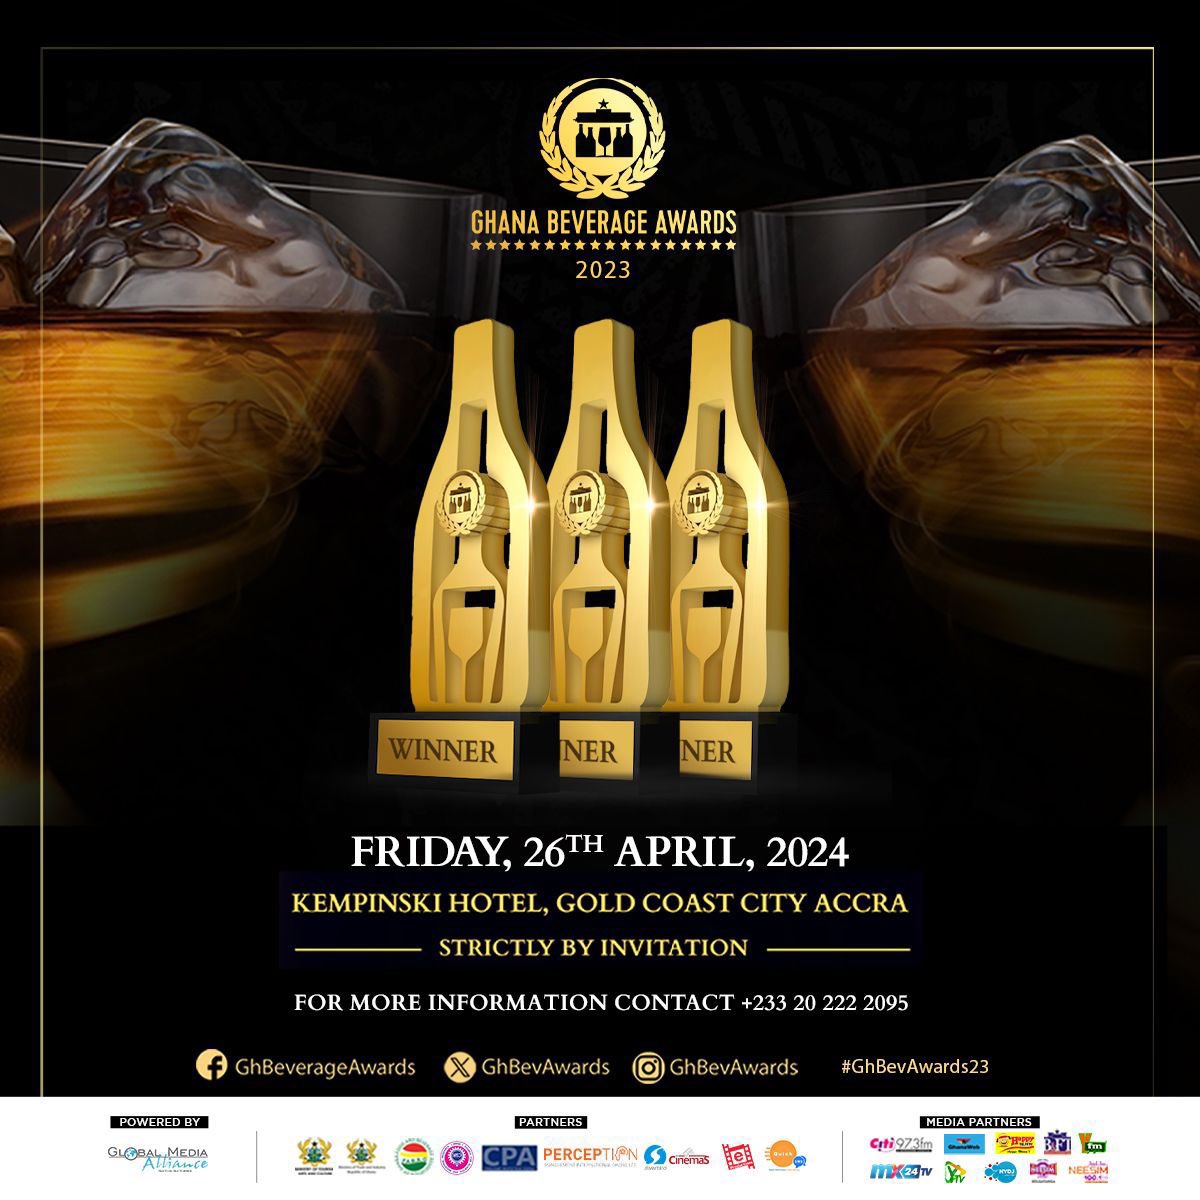 Ghana Beverage awards is happening tonight at kempinski hotel, don't miss out on who takes the ultimate awards #GhBevAwards23